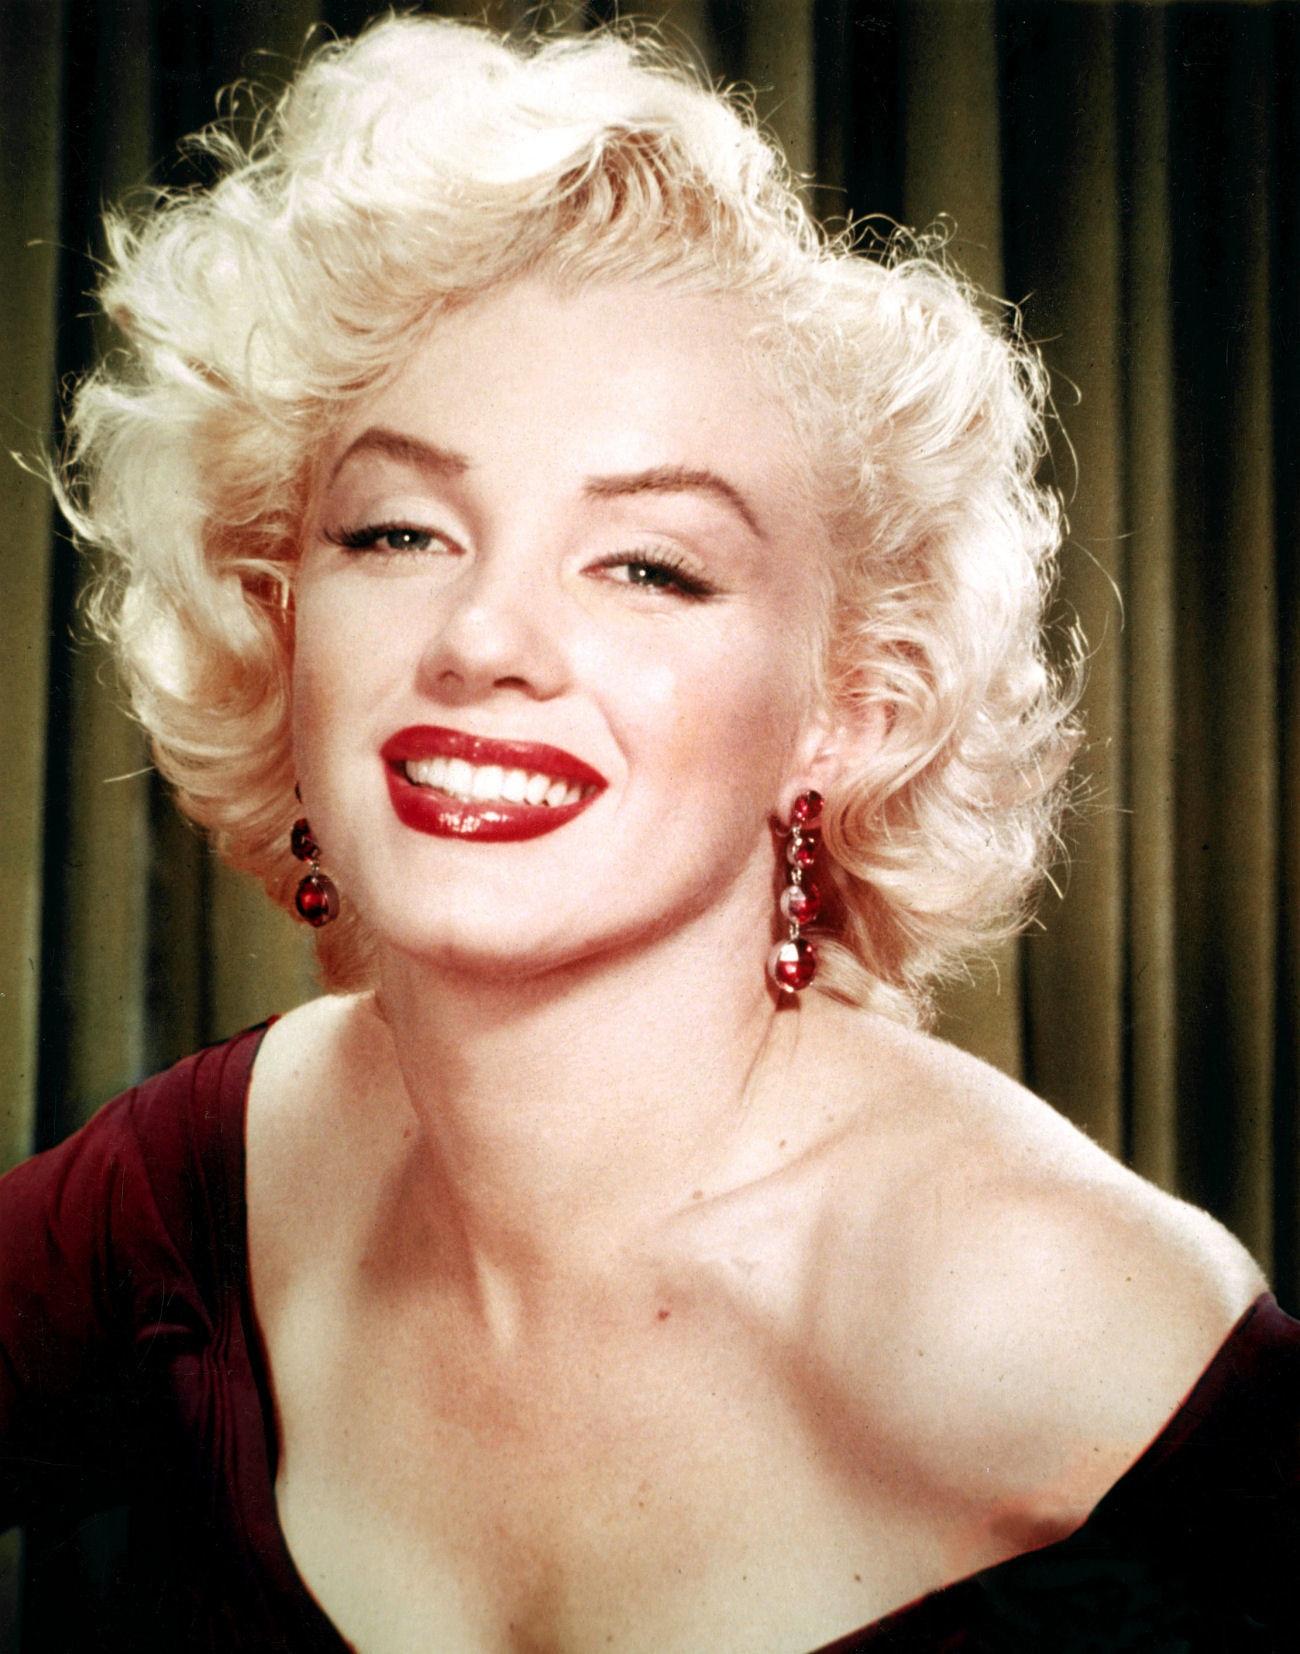 Marilyn Monroe - Among the famous people with boderline personality disorder